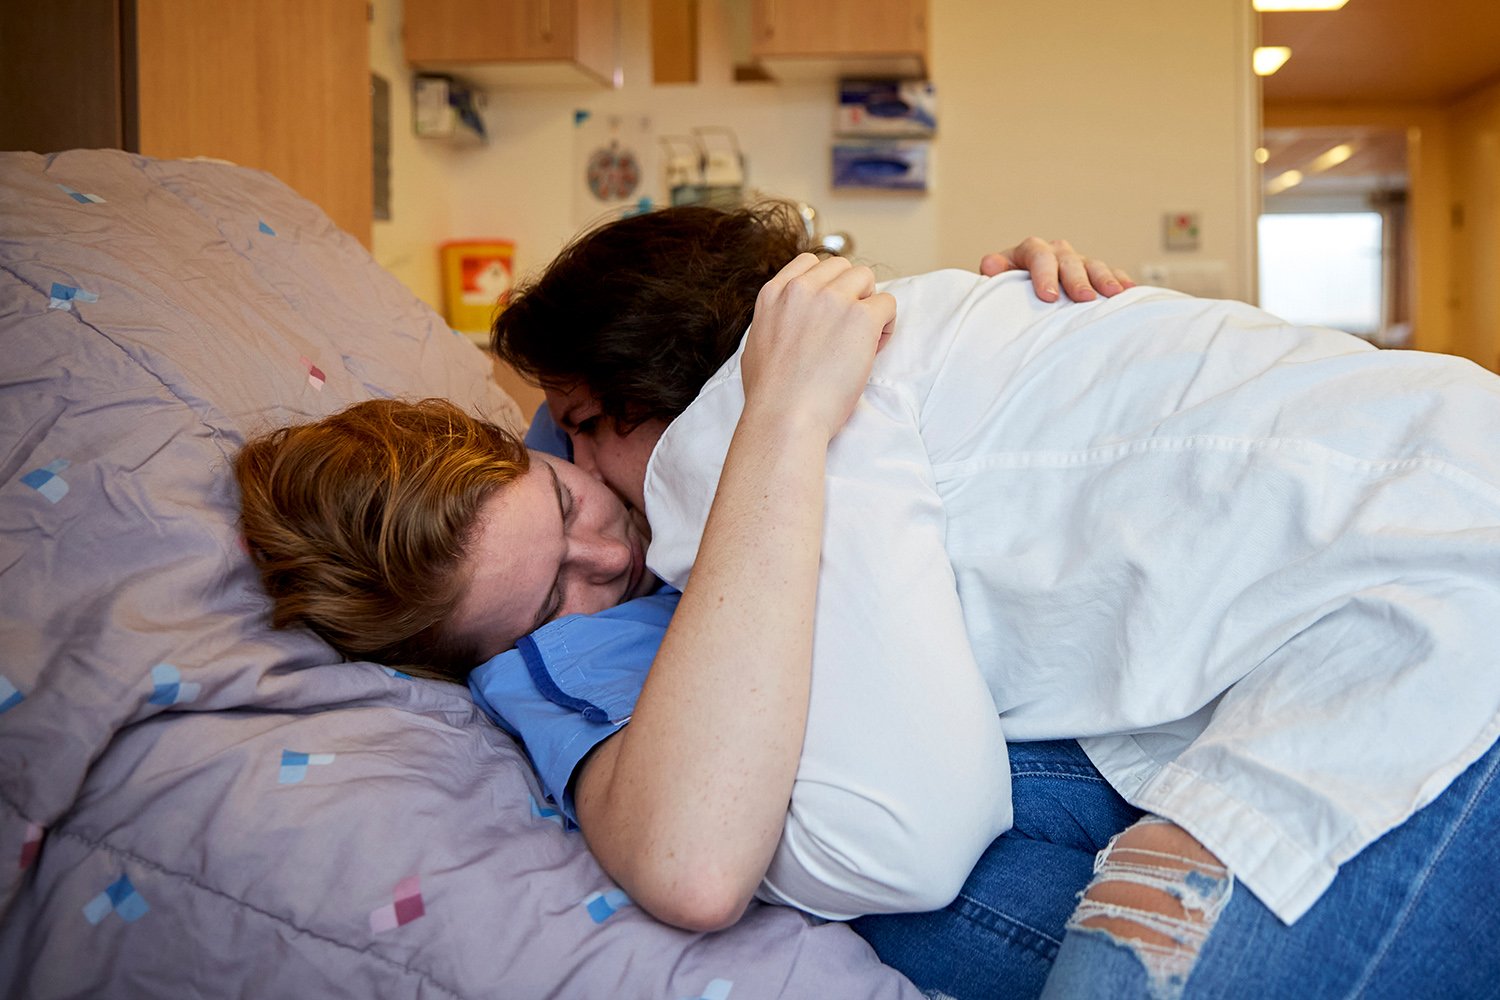  Dominique, quarterback for the Zwolle Blue Jays, hugs her girlfriend, Ricky, just before being taken into an operating room to have tendons in her left knee repaired, Zevenaar, NL, 2021. 